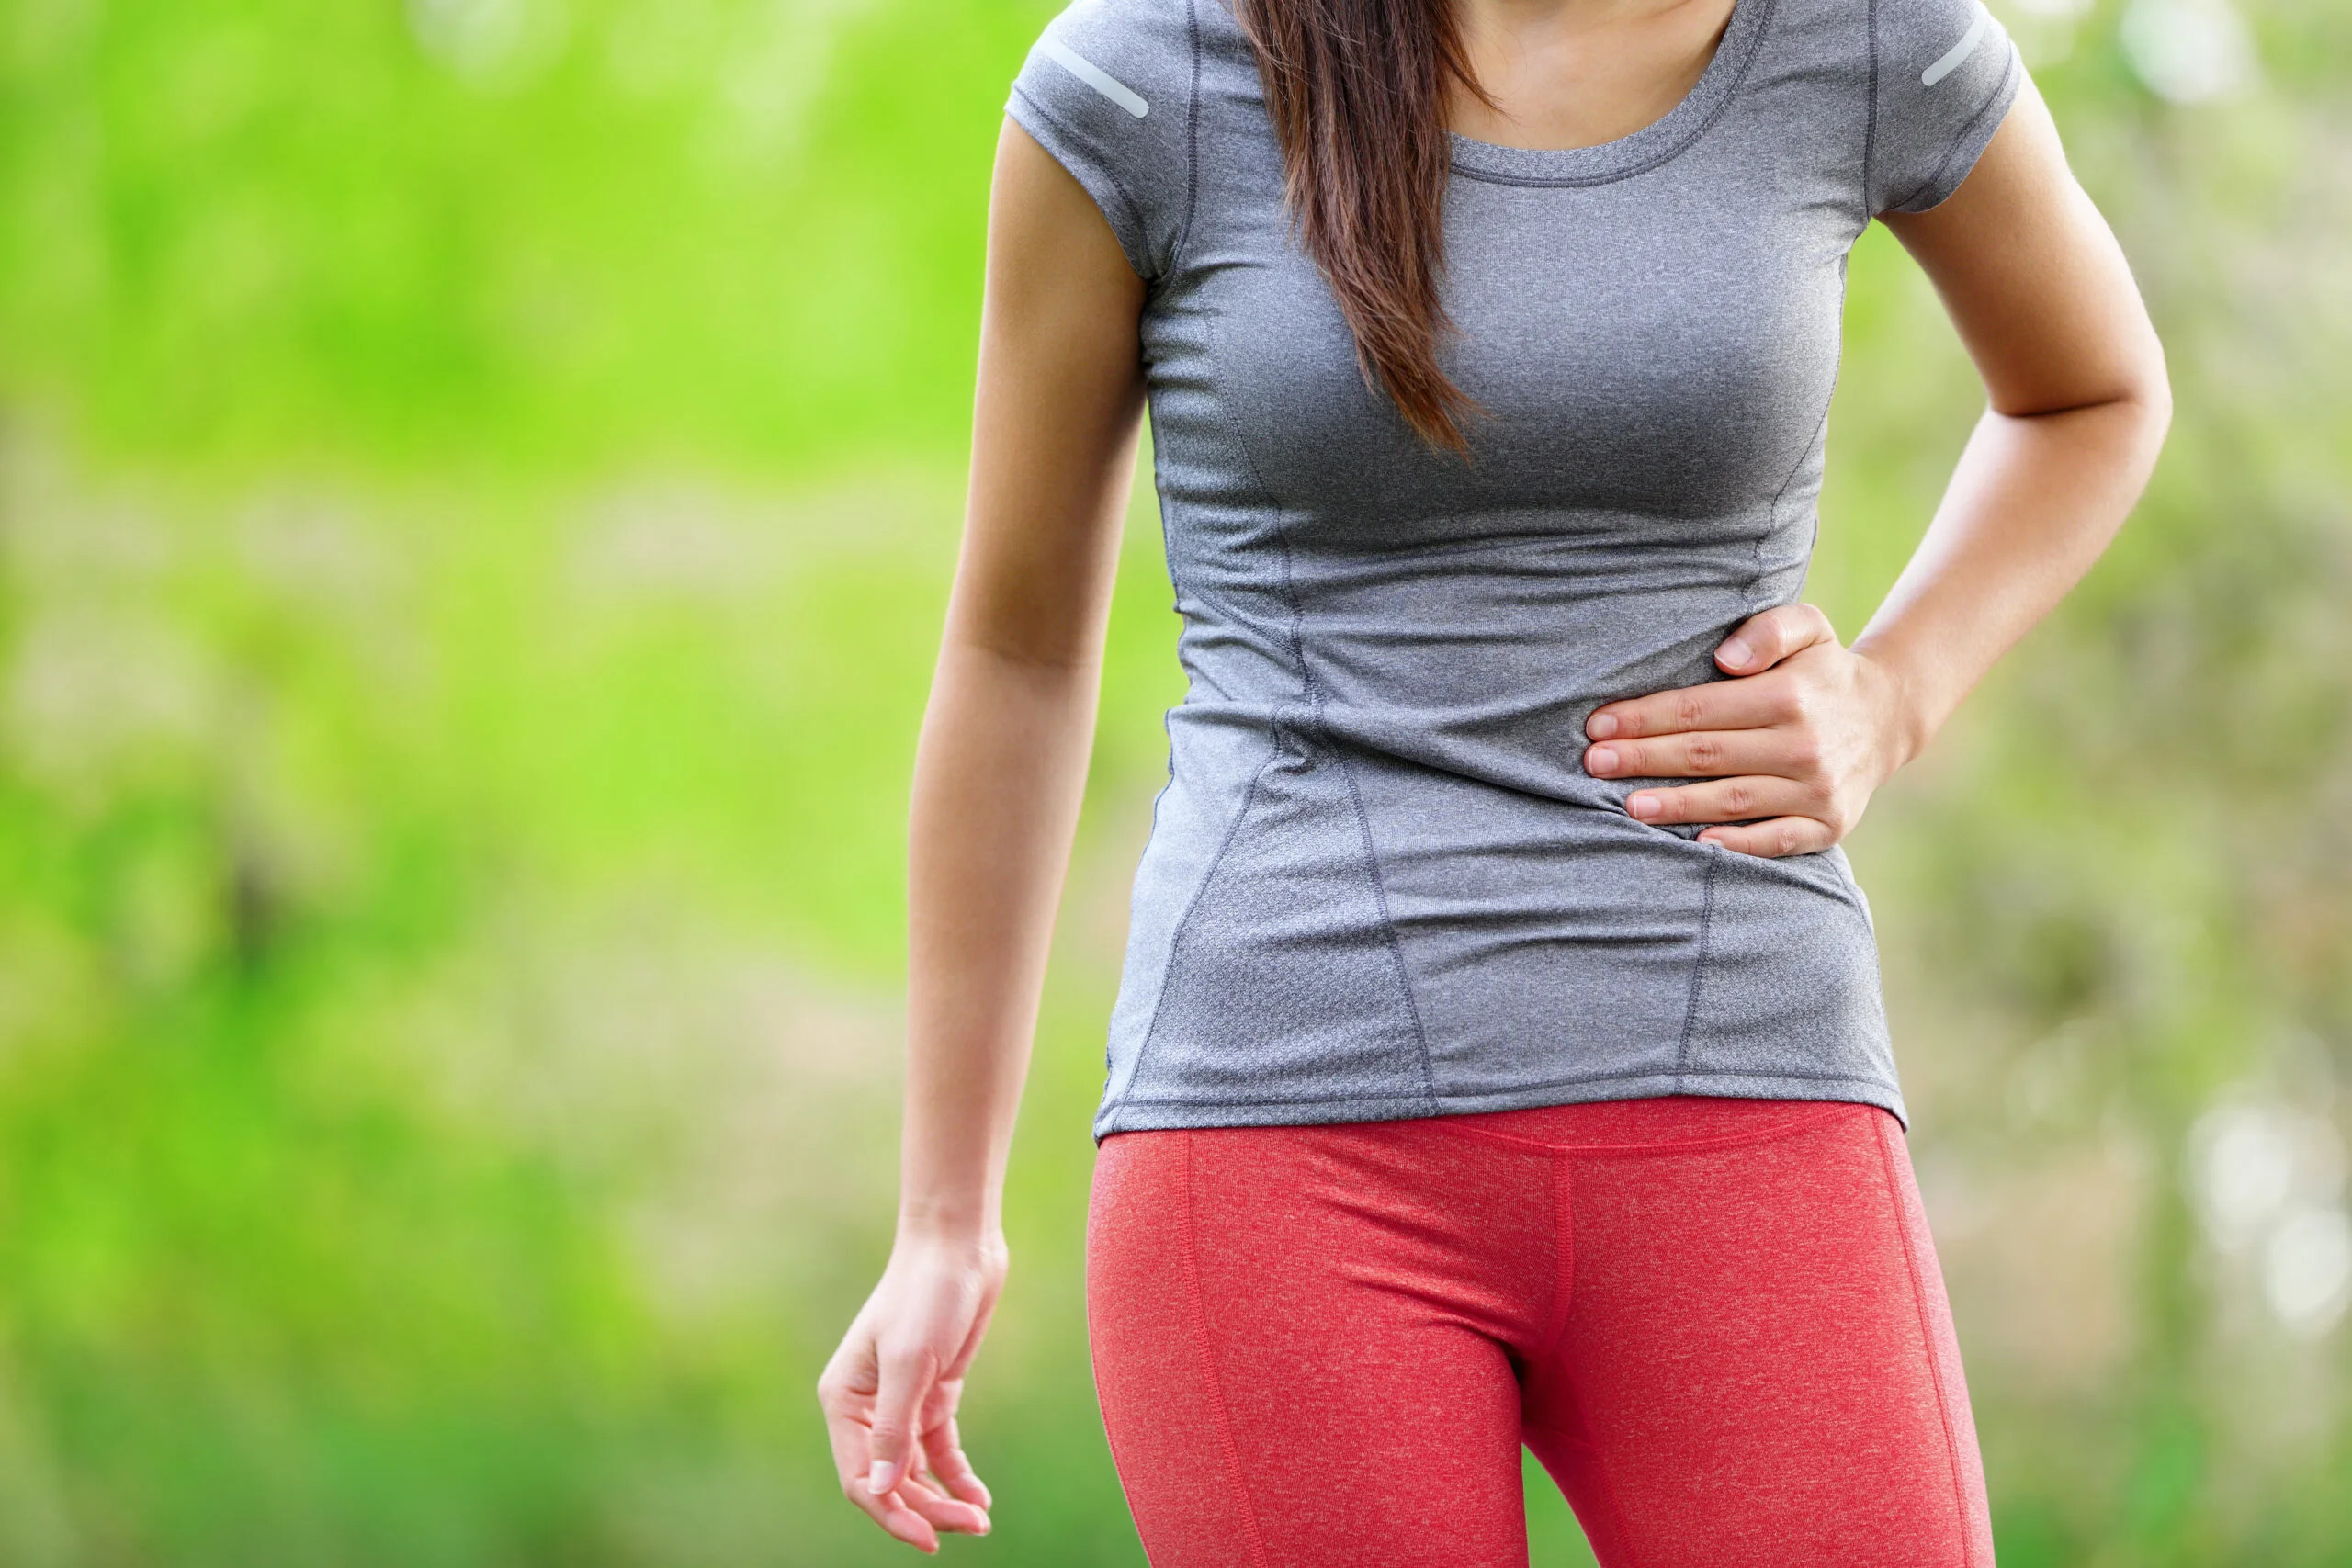 What Causes Stomach Pain And Throwing Up During Distance Running